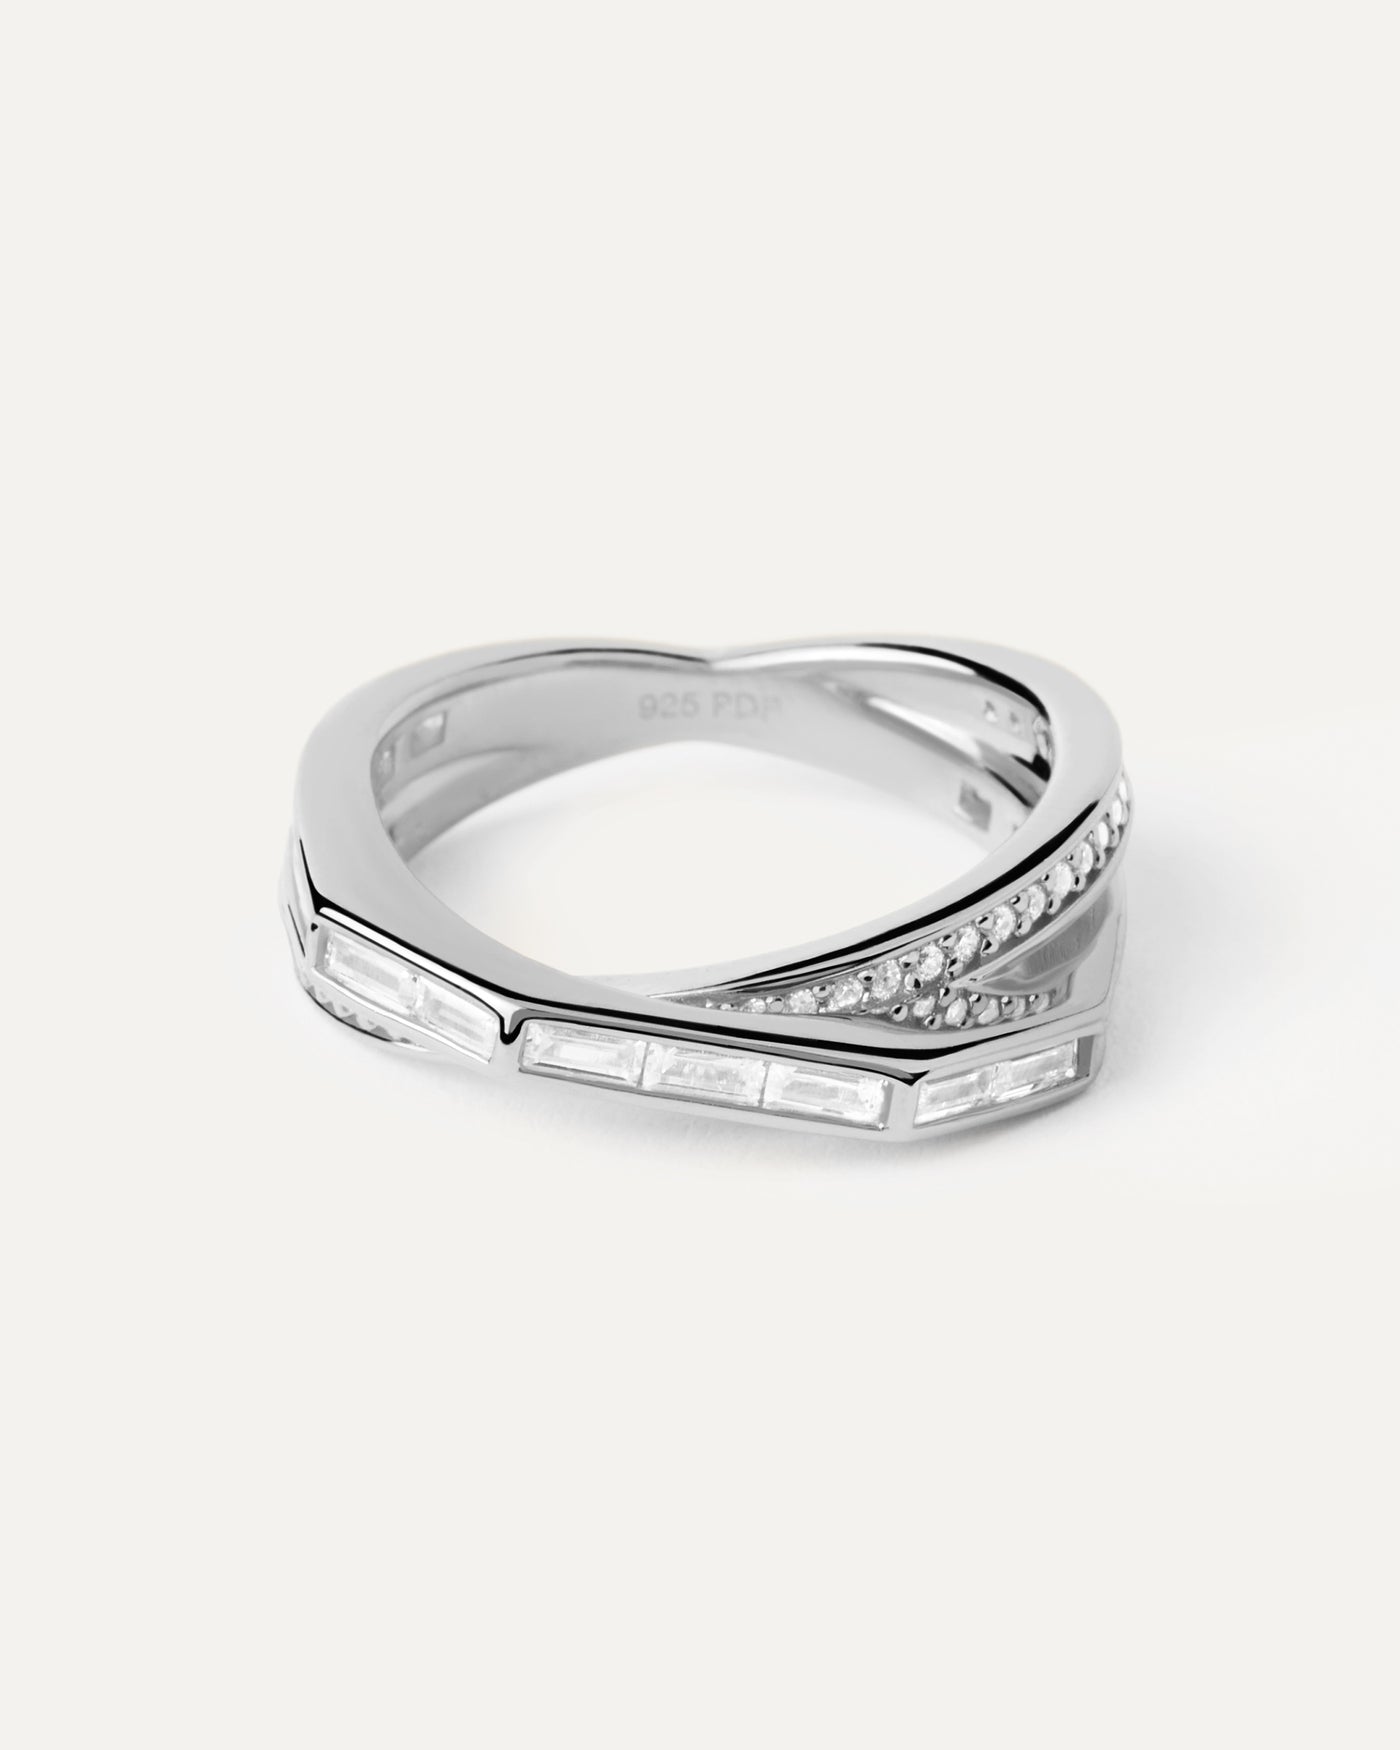 2023 Selection | Olivia Silver Ring. Crossover two band silver ring set with white zirconia. Get the latest arrival from PDPAOLA. Place your order safely and get this Best Seller. Free Shipping.